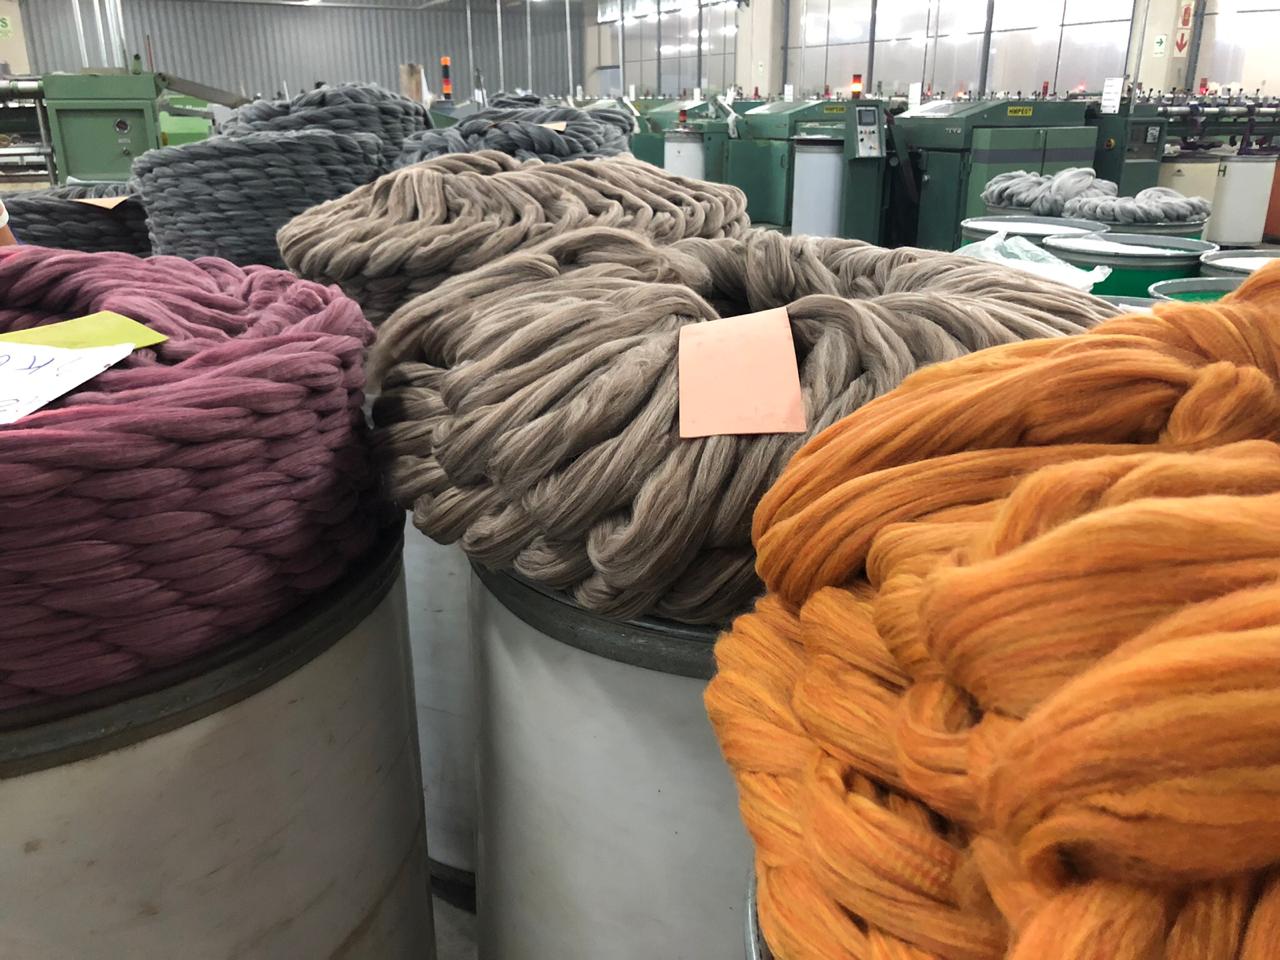 Alpaca wool: one of the finest natural fibers in the world